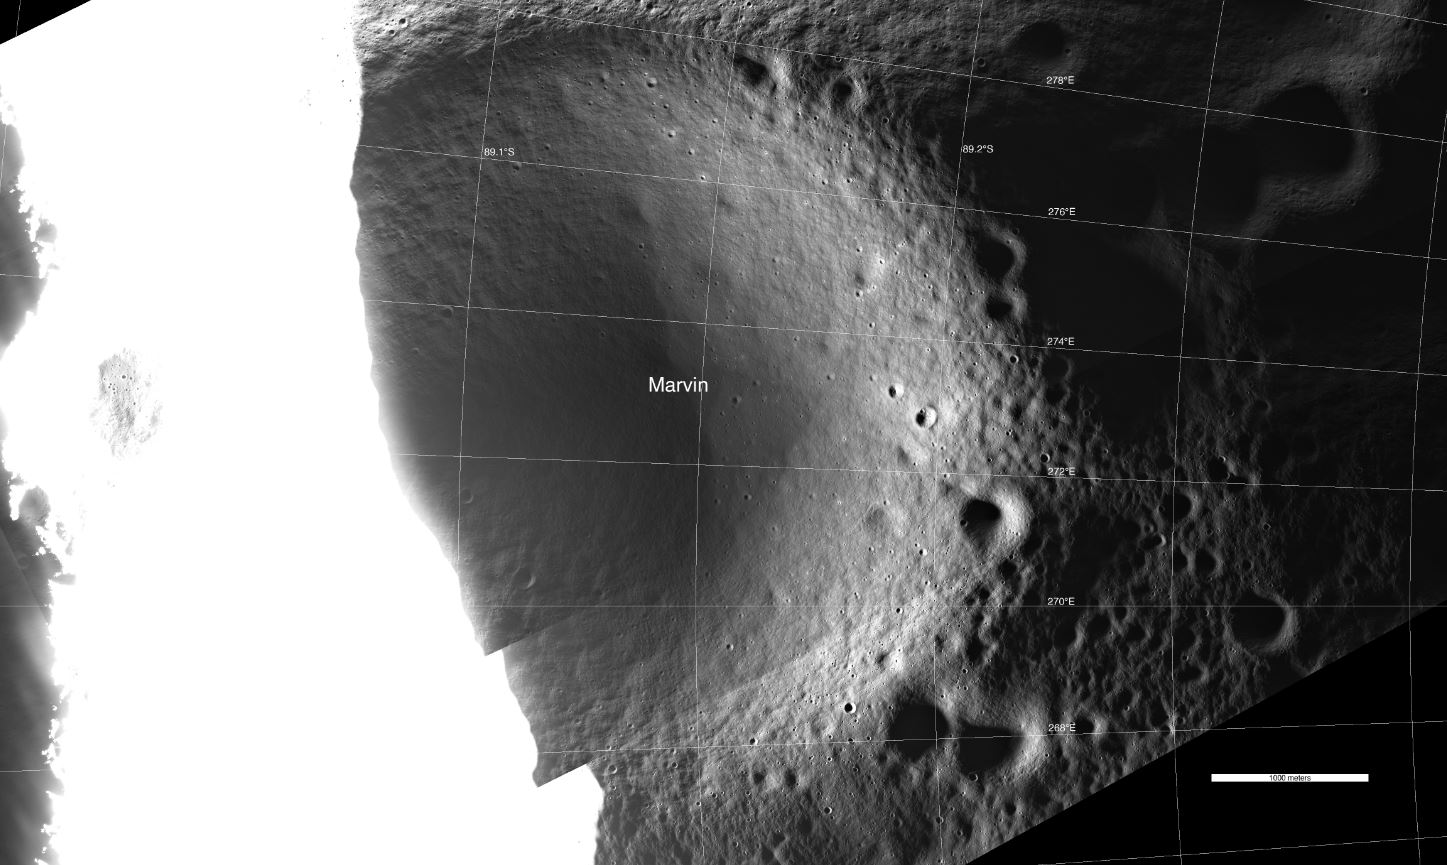 Marvin Crater was photographed using reflected light compared to the surroundings flooded with direct sunlight.